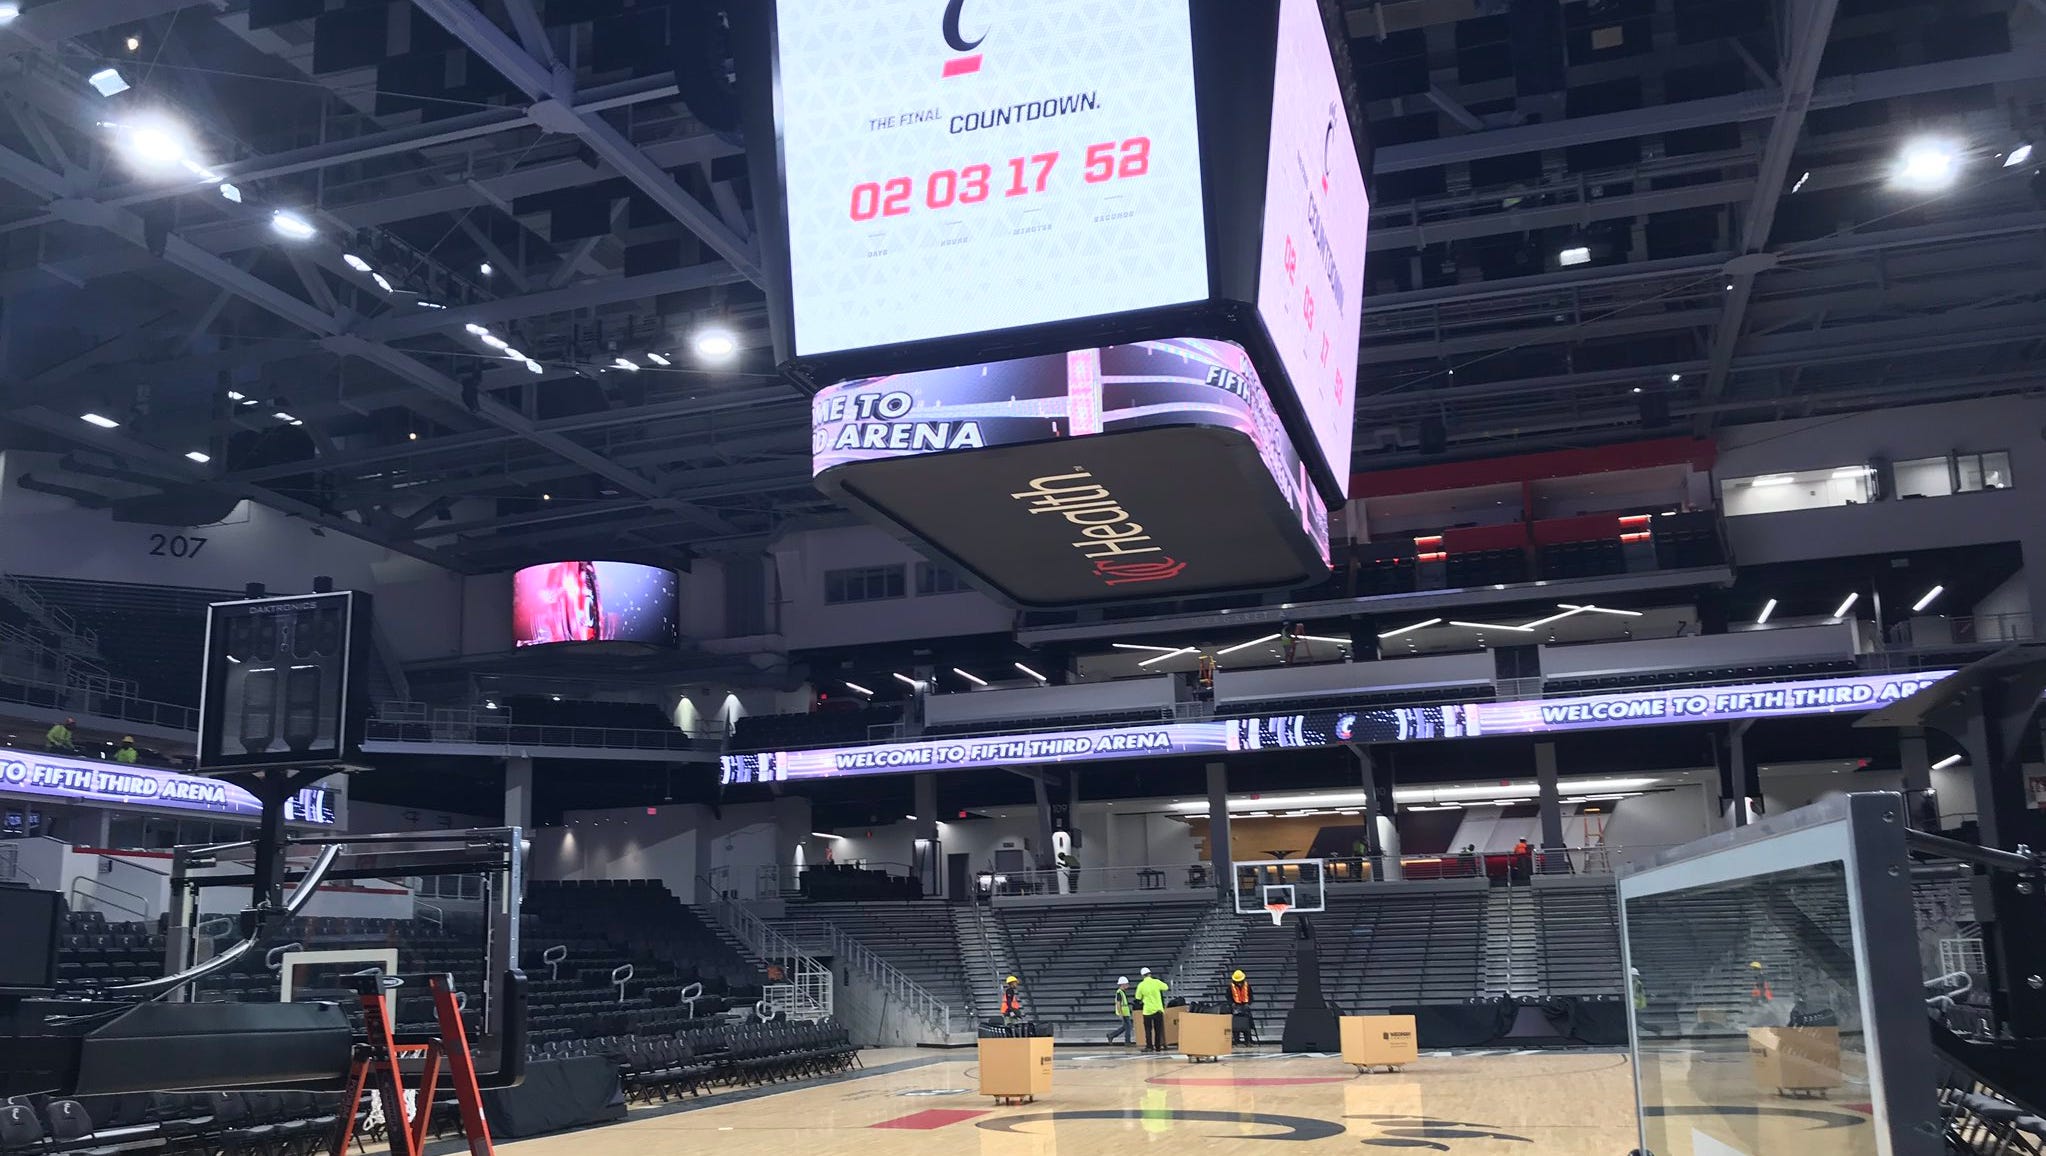 Fifth Third Arena Renovation Seating Chart